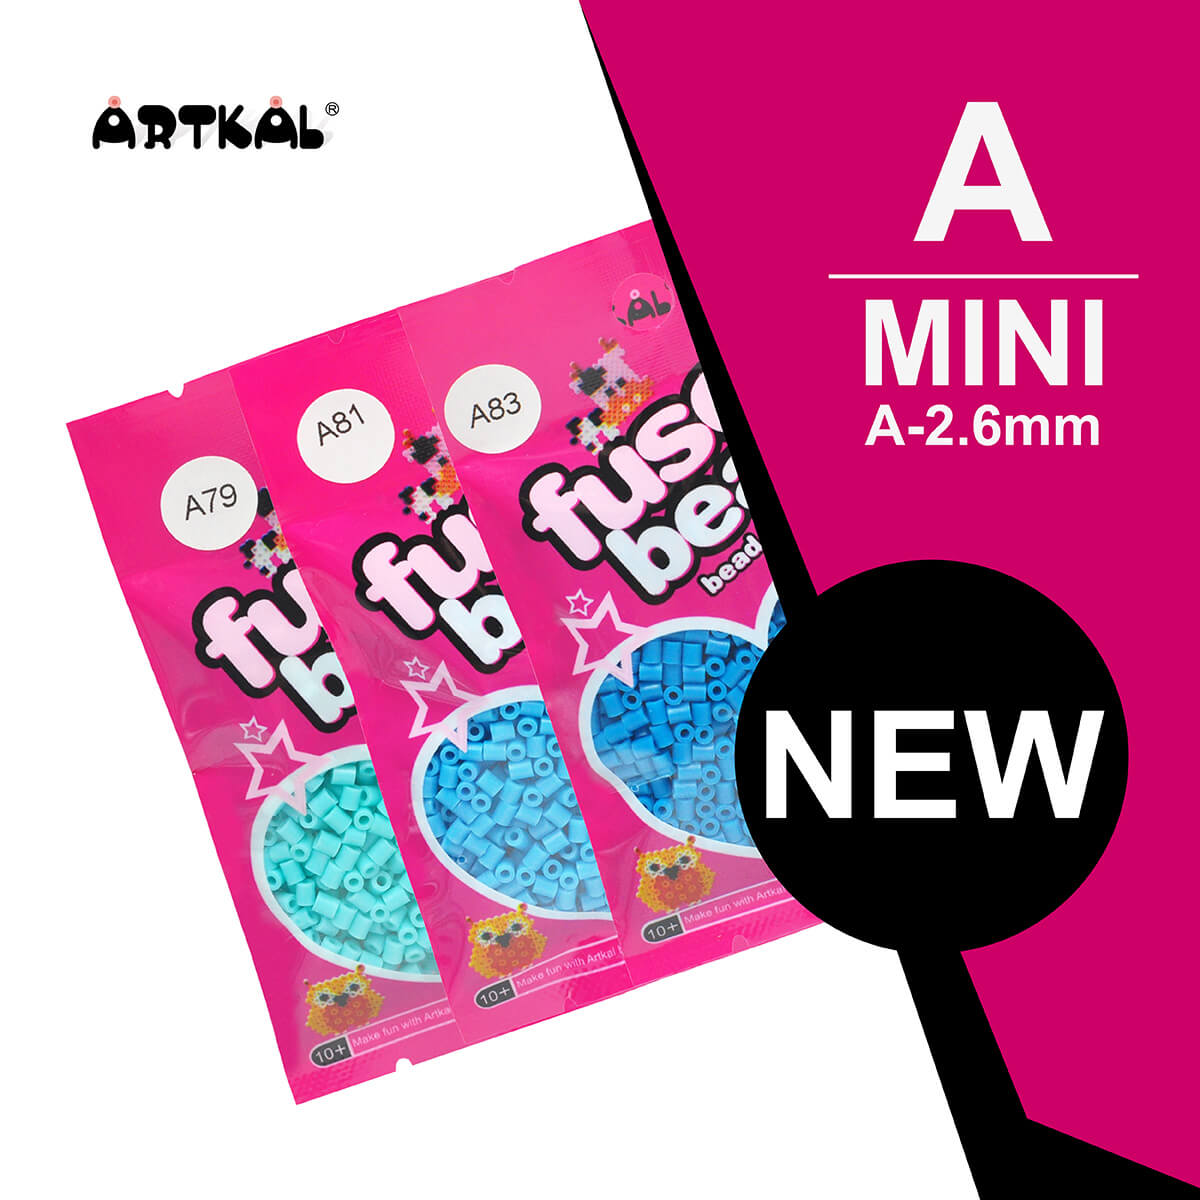 Artkal 71 bags NEW Color Set A-2.6mm Soft Mini Beads (AB1000-N) – Official  Artkal Store